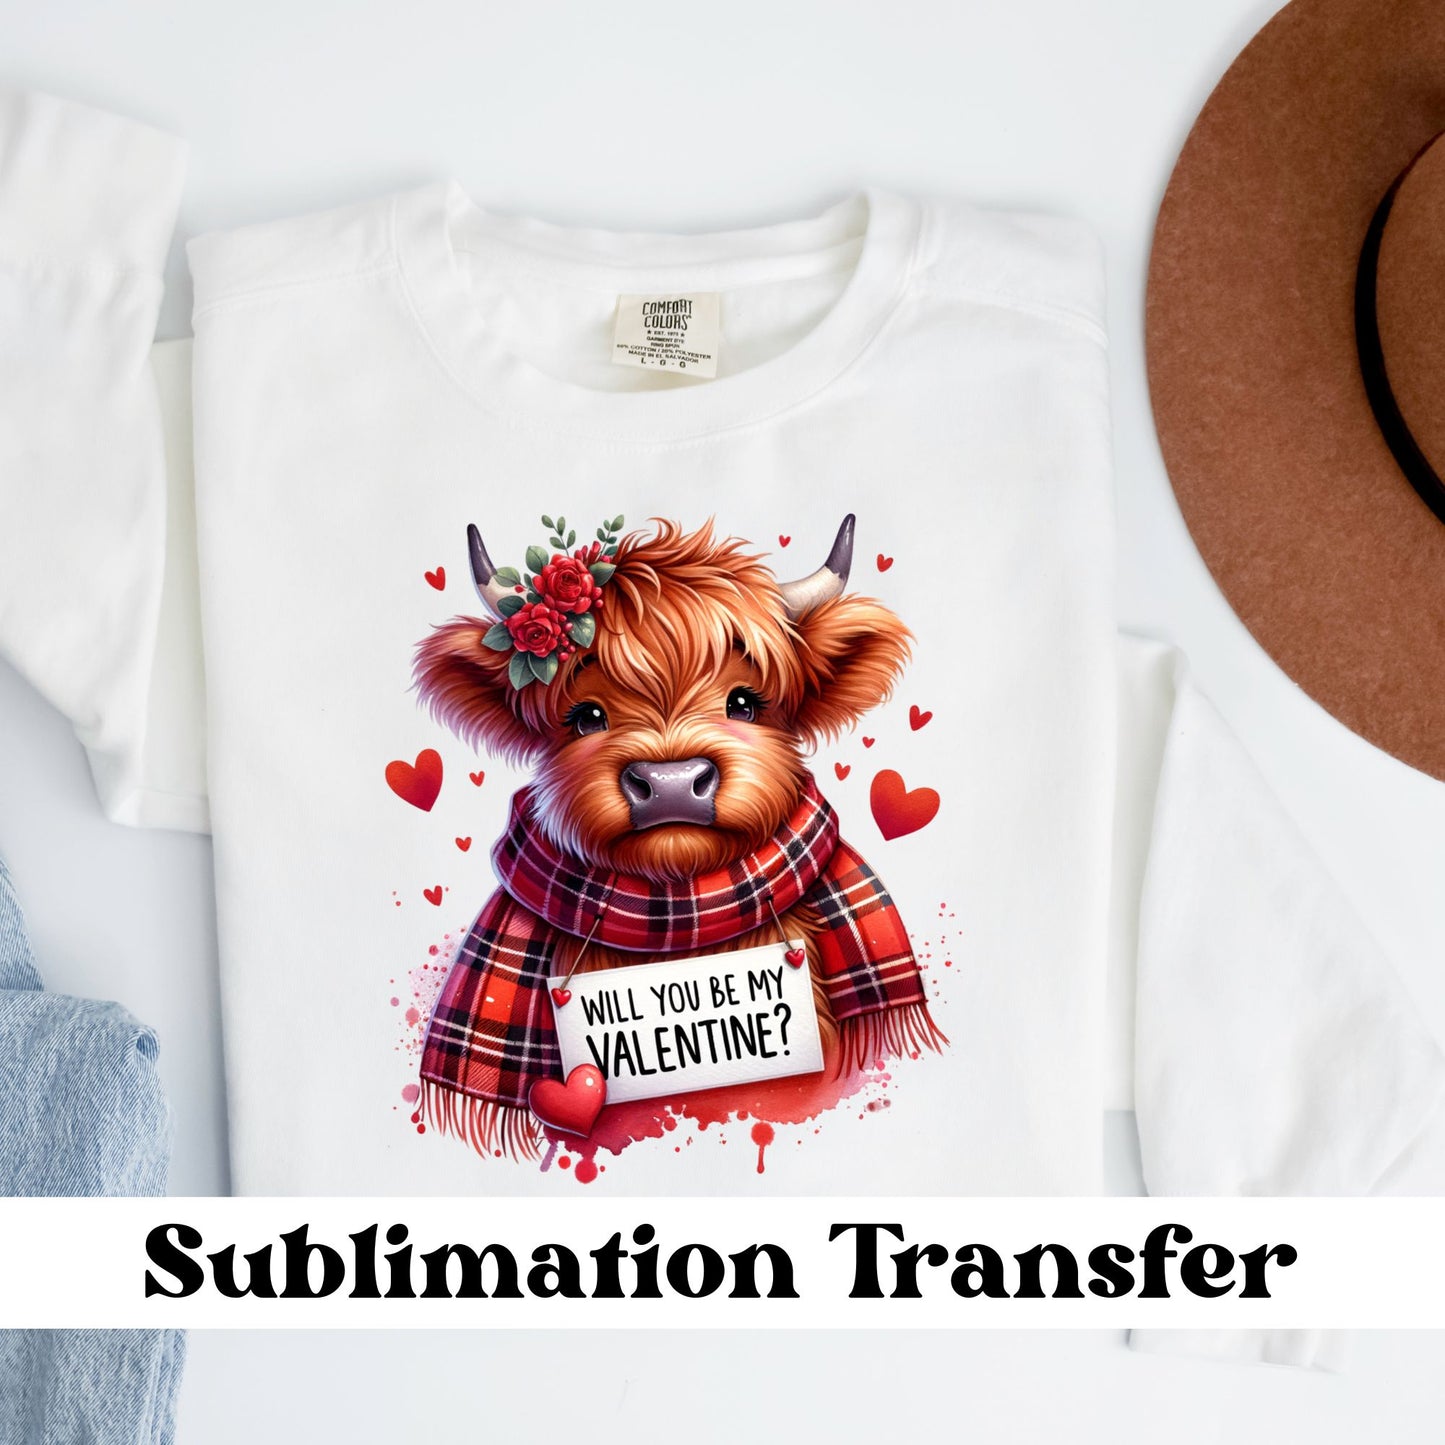 6 pc Ready To Press Cute Cow Chicken Sublimation Transfer Bundle, Sublimation Transfers For Shirts, Sweatshirts, Totes, Jeans, Puzzles